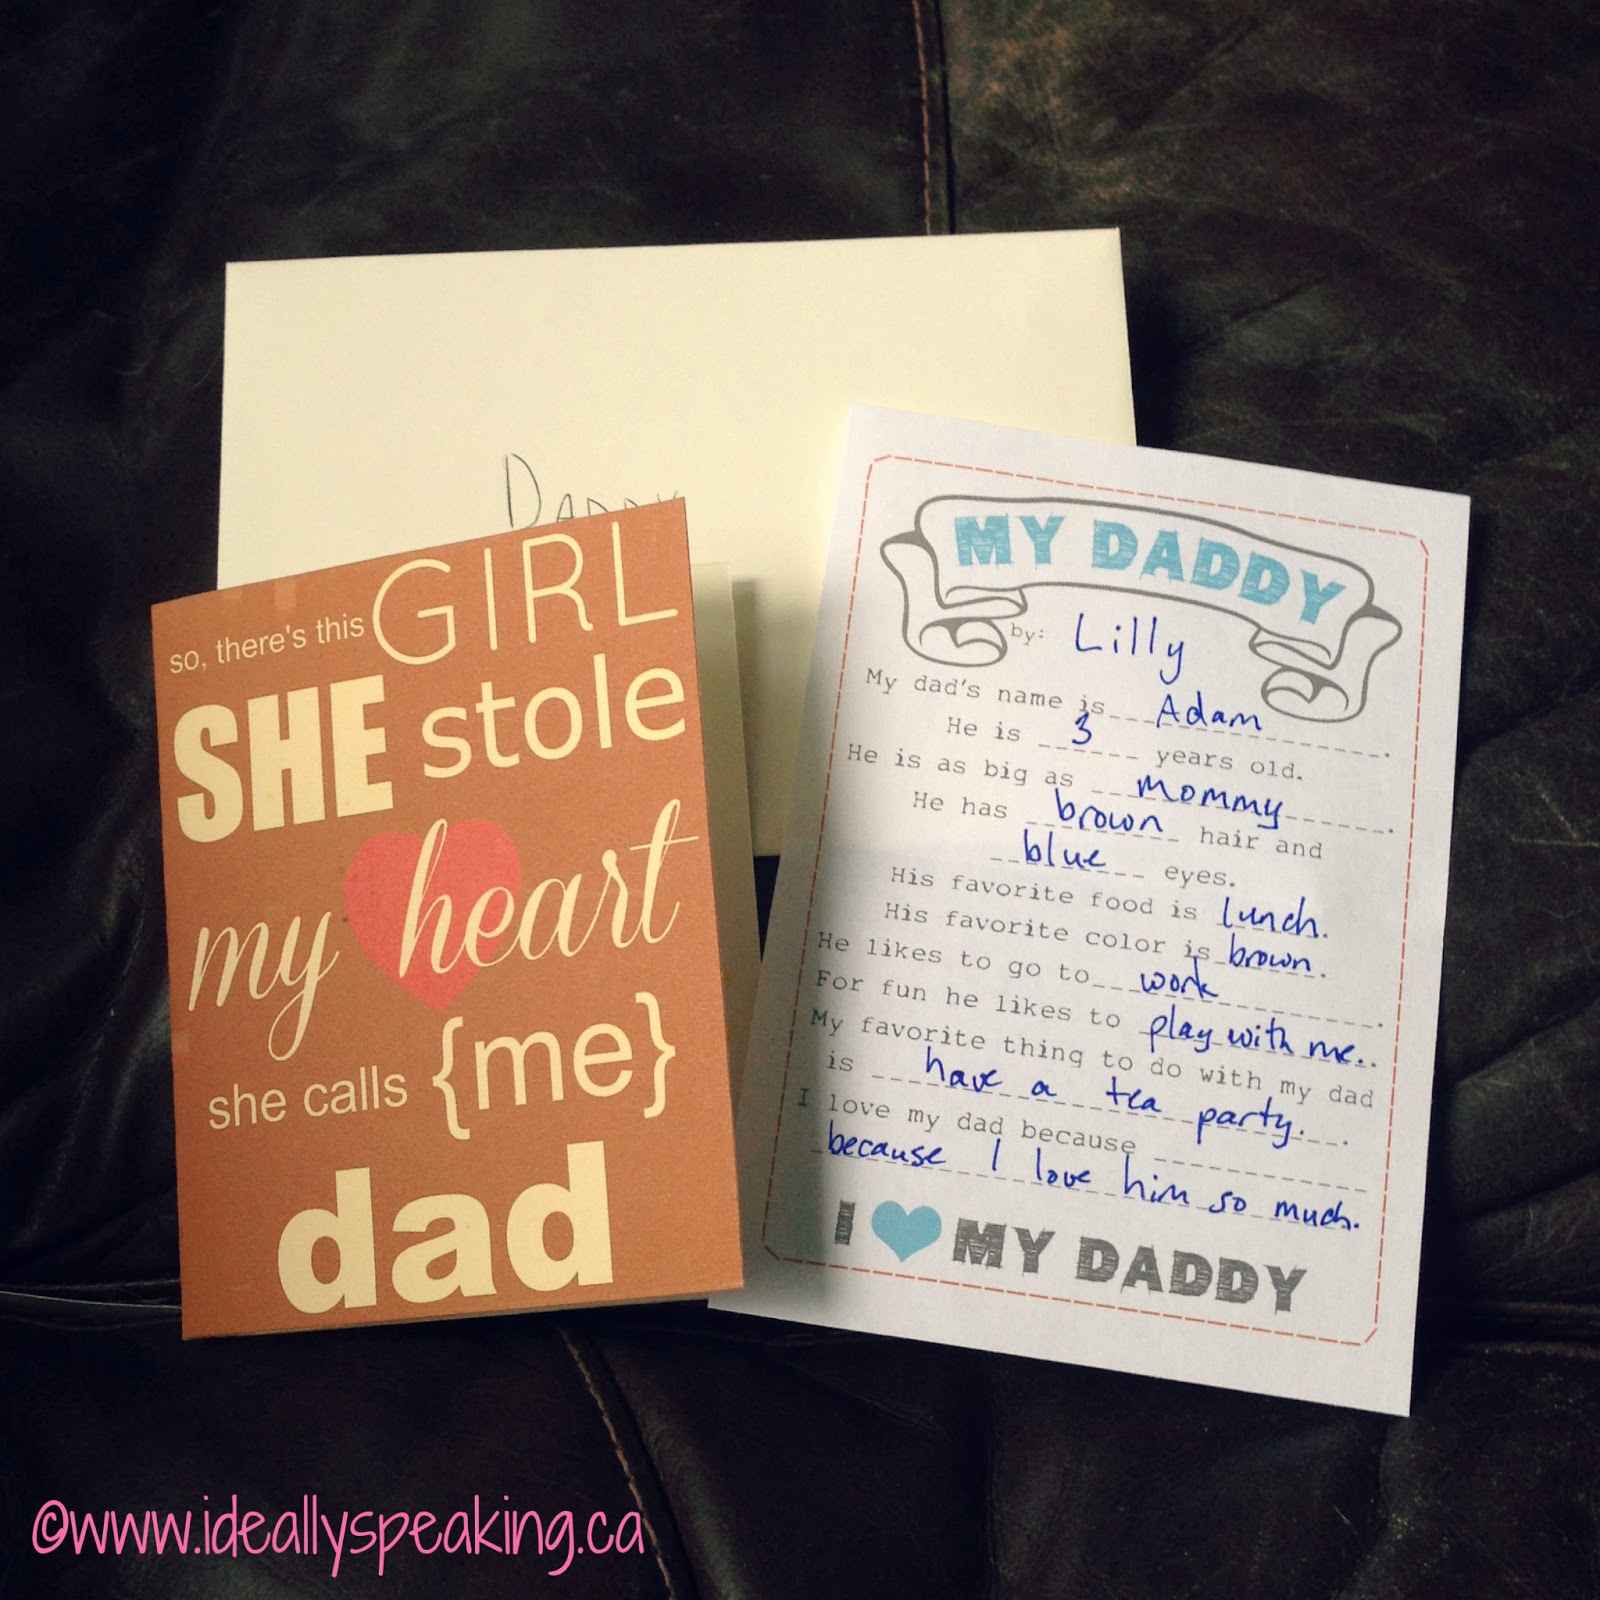 Father's Day Printables